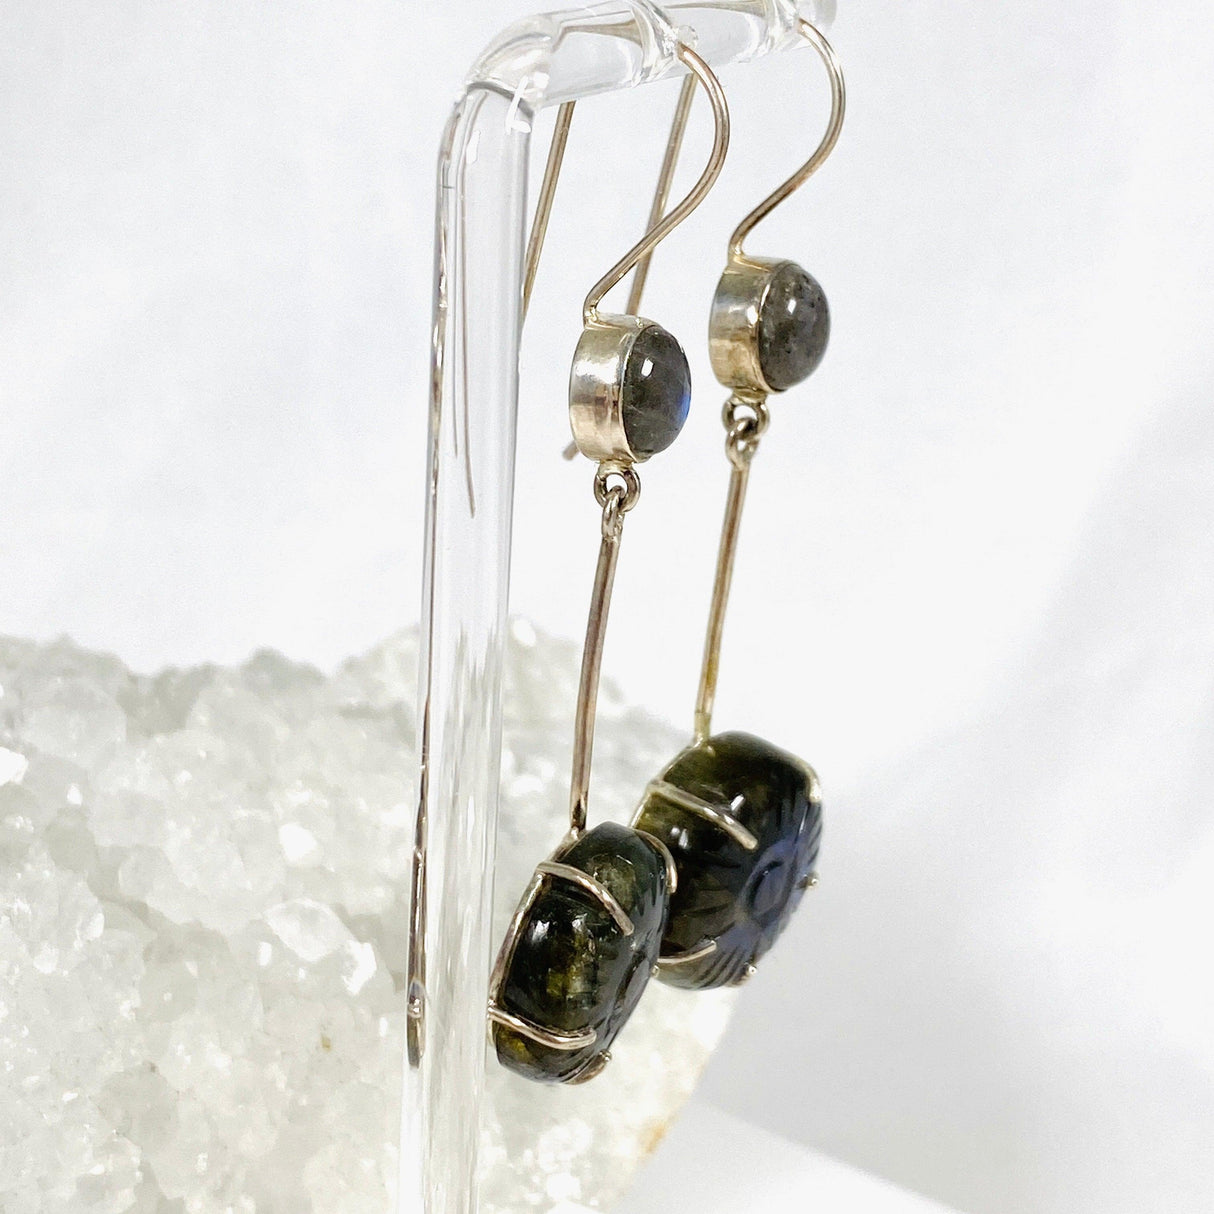 Labradorite and silver earrings with blue flower carving at the bottom with a silver stem going up to a small round labradoite gemstone with a fixed hook hangning from a stand